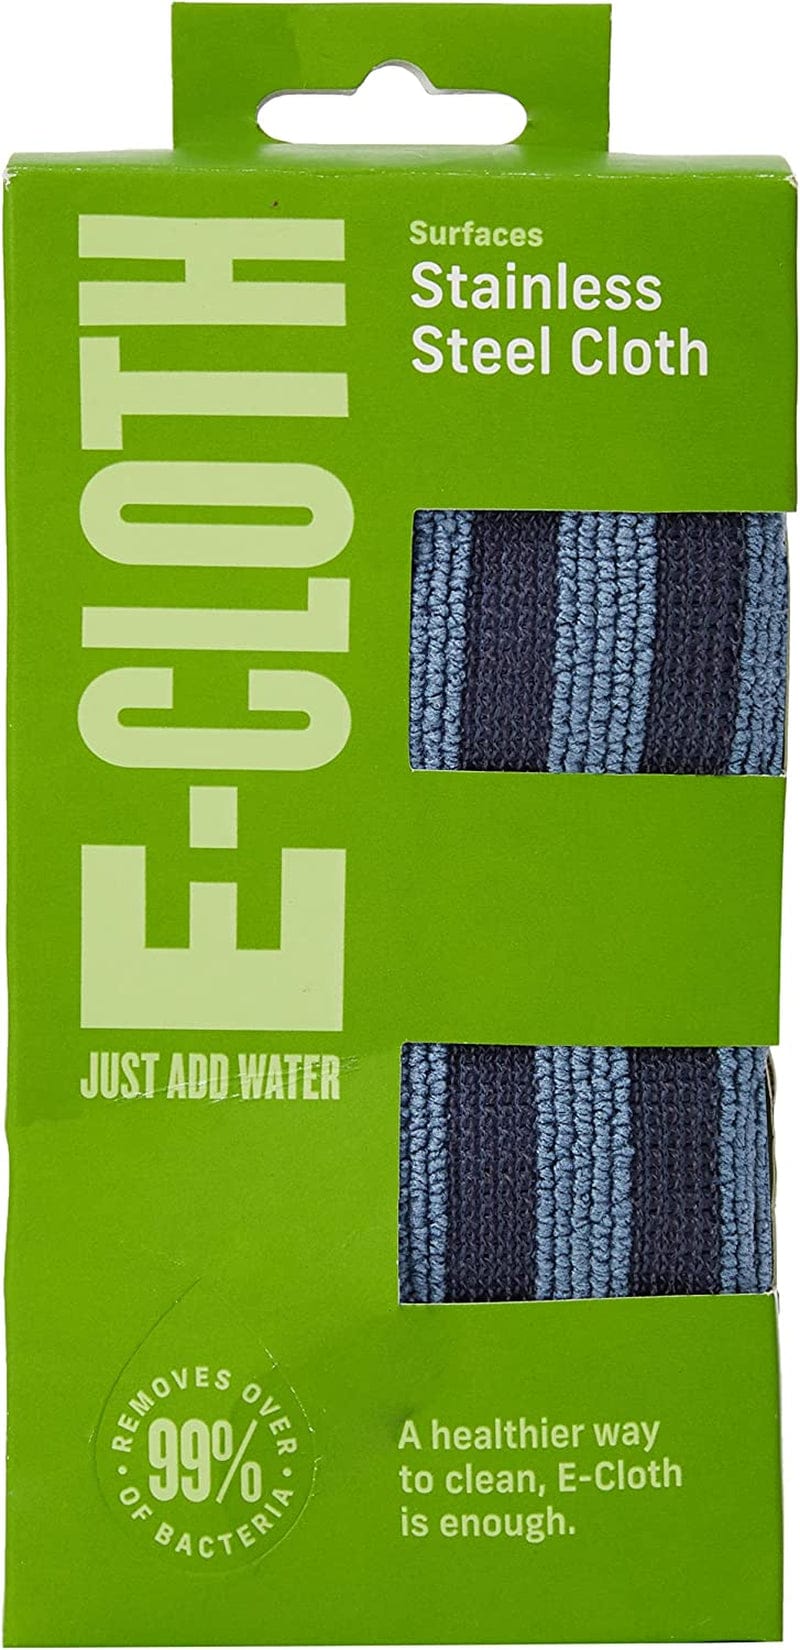 E-Cloth Stainless Steel Cleaning Cloth, Microfiber Stainless Steel Cleaner for a Spotless Shine Home Appliances, Oven, Stove and Refrigerators, Washable and Reusable, 100 Wash Promise Home & Garden > Household Supplies > Household Cleaning Supplies TADgreen Cleaning & Polishing Set Standard Packaging 